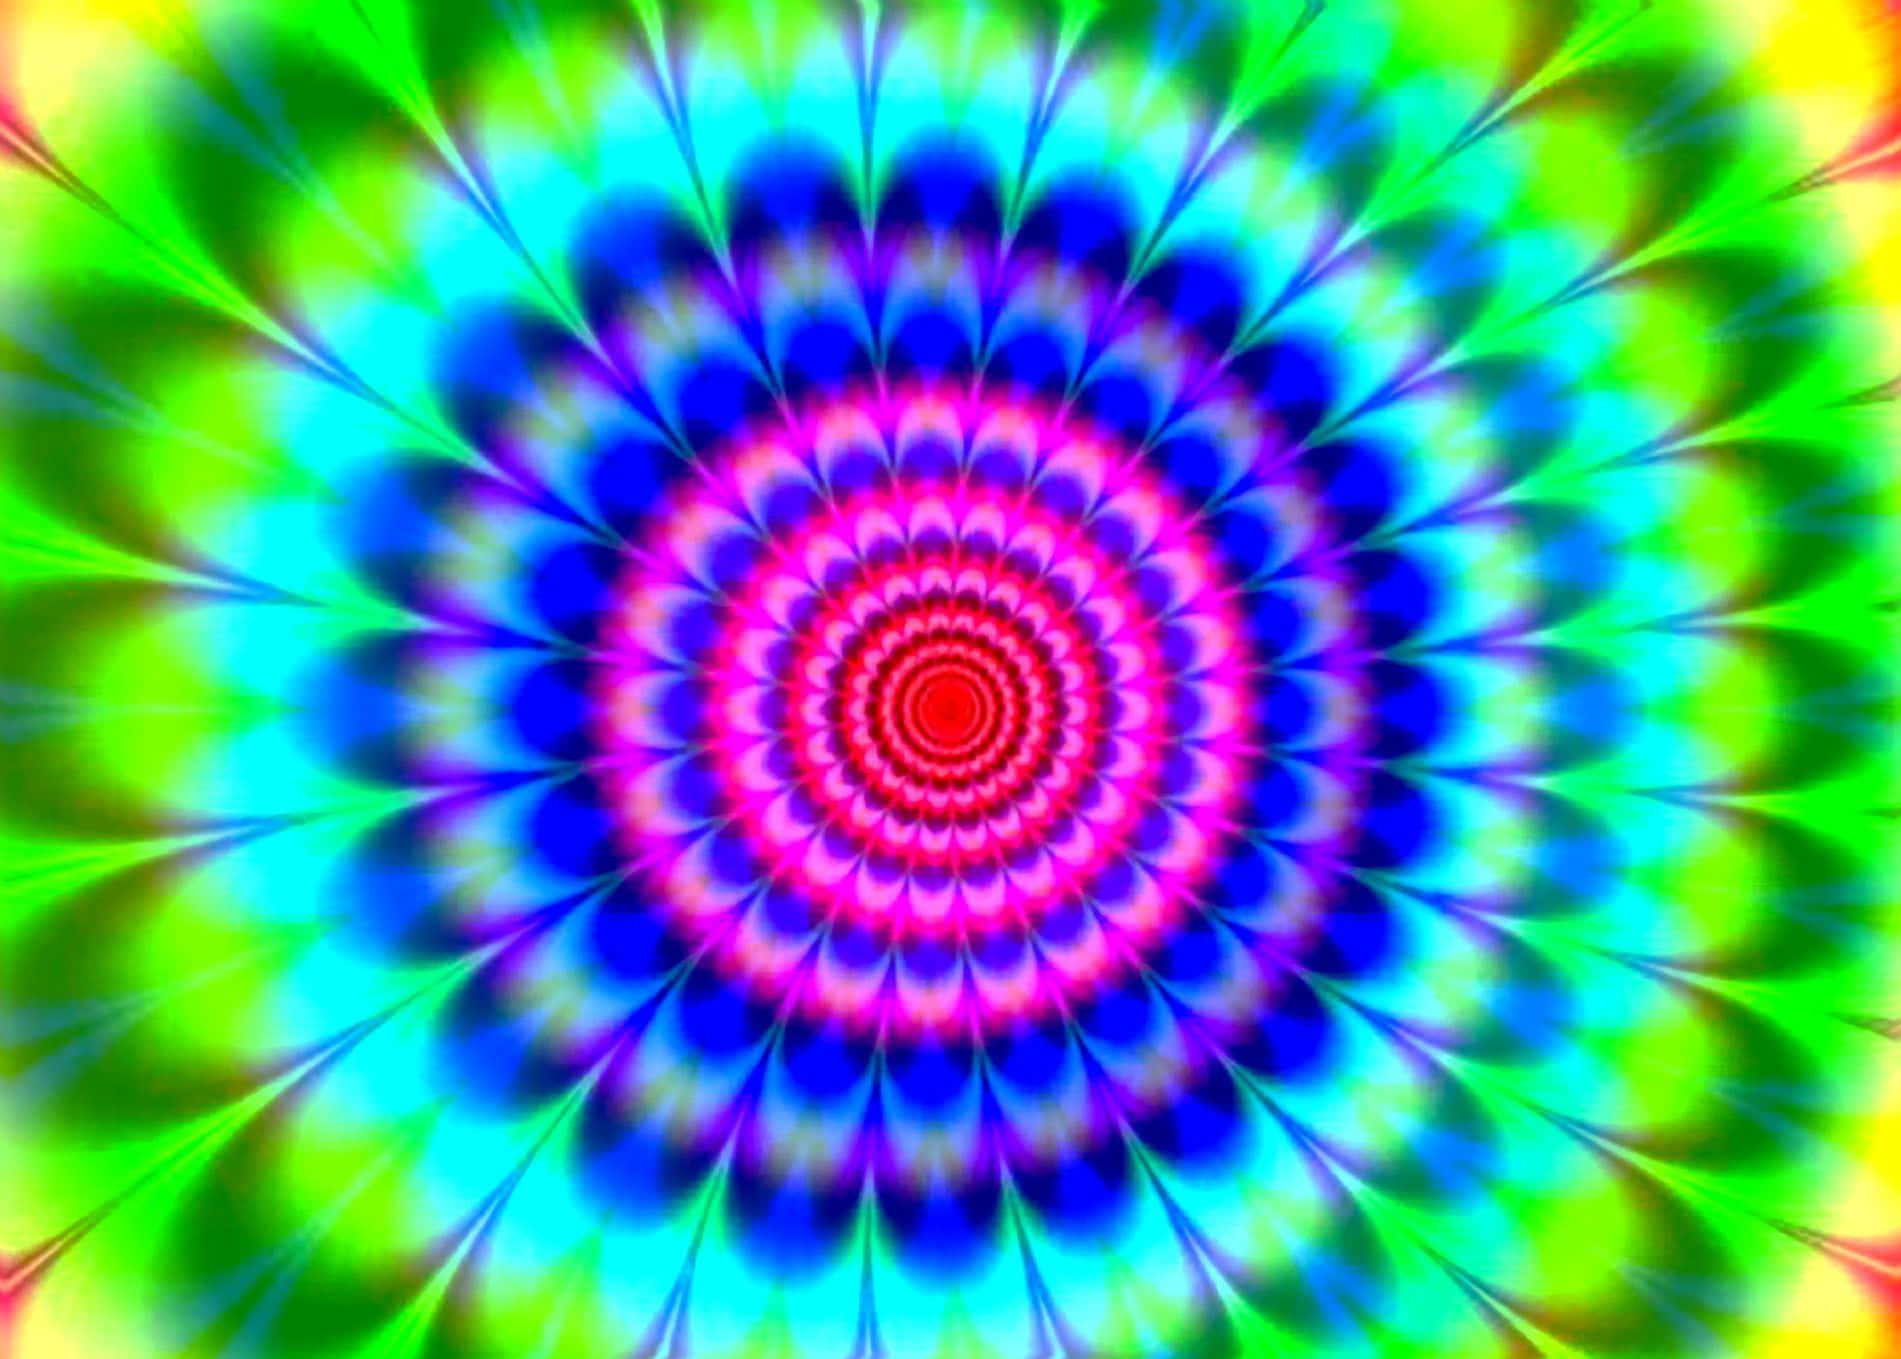 Rainbow Psychedelic Spiral Cool Optical Illusions Wallpaper